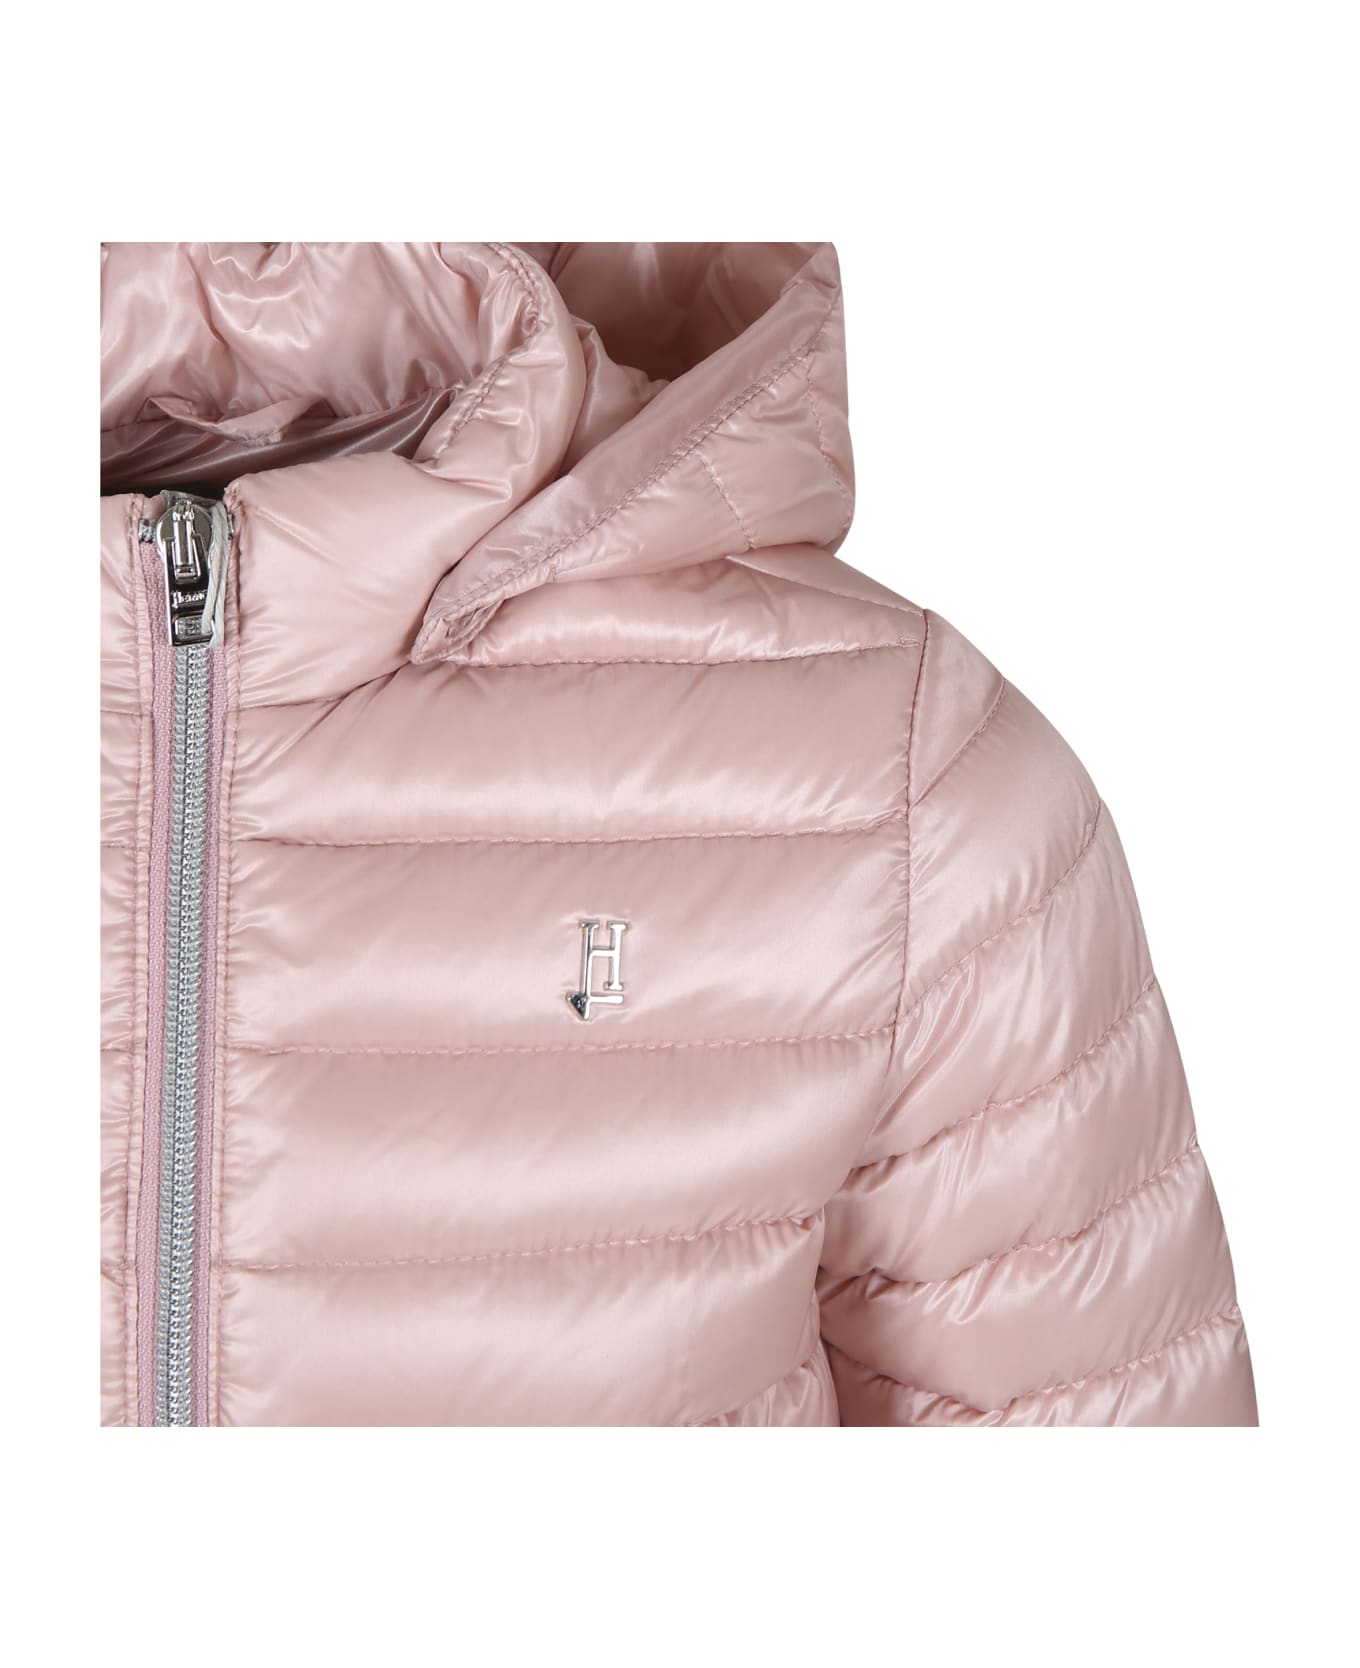 Herno Pink Down Jacket For Girl With Logo - Pink